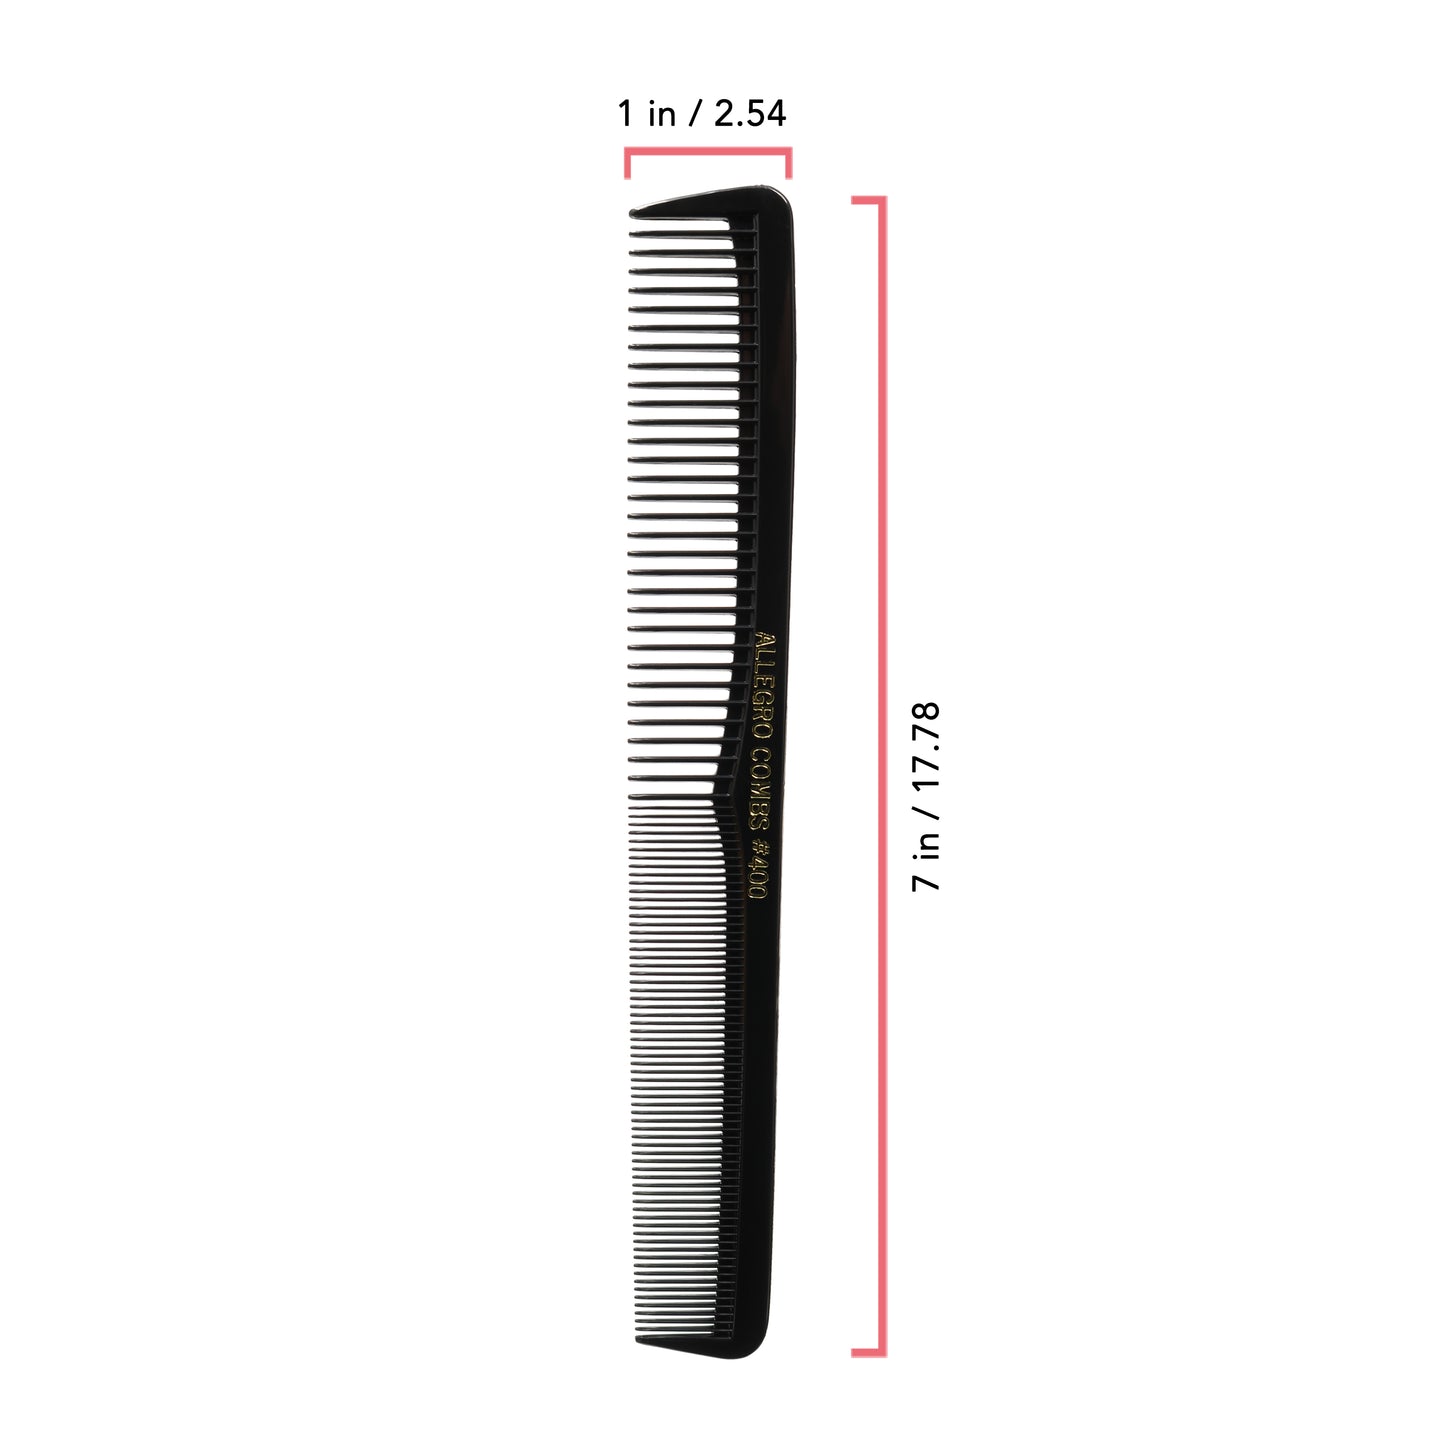 Allegro Combs 400 Barbers Cutting Combs All Purpose Combs Wide Fine Tooth Black Combs. 12 Pk